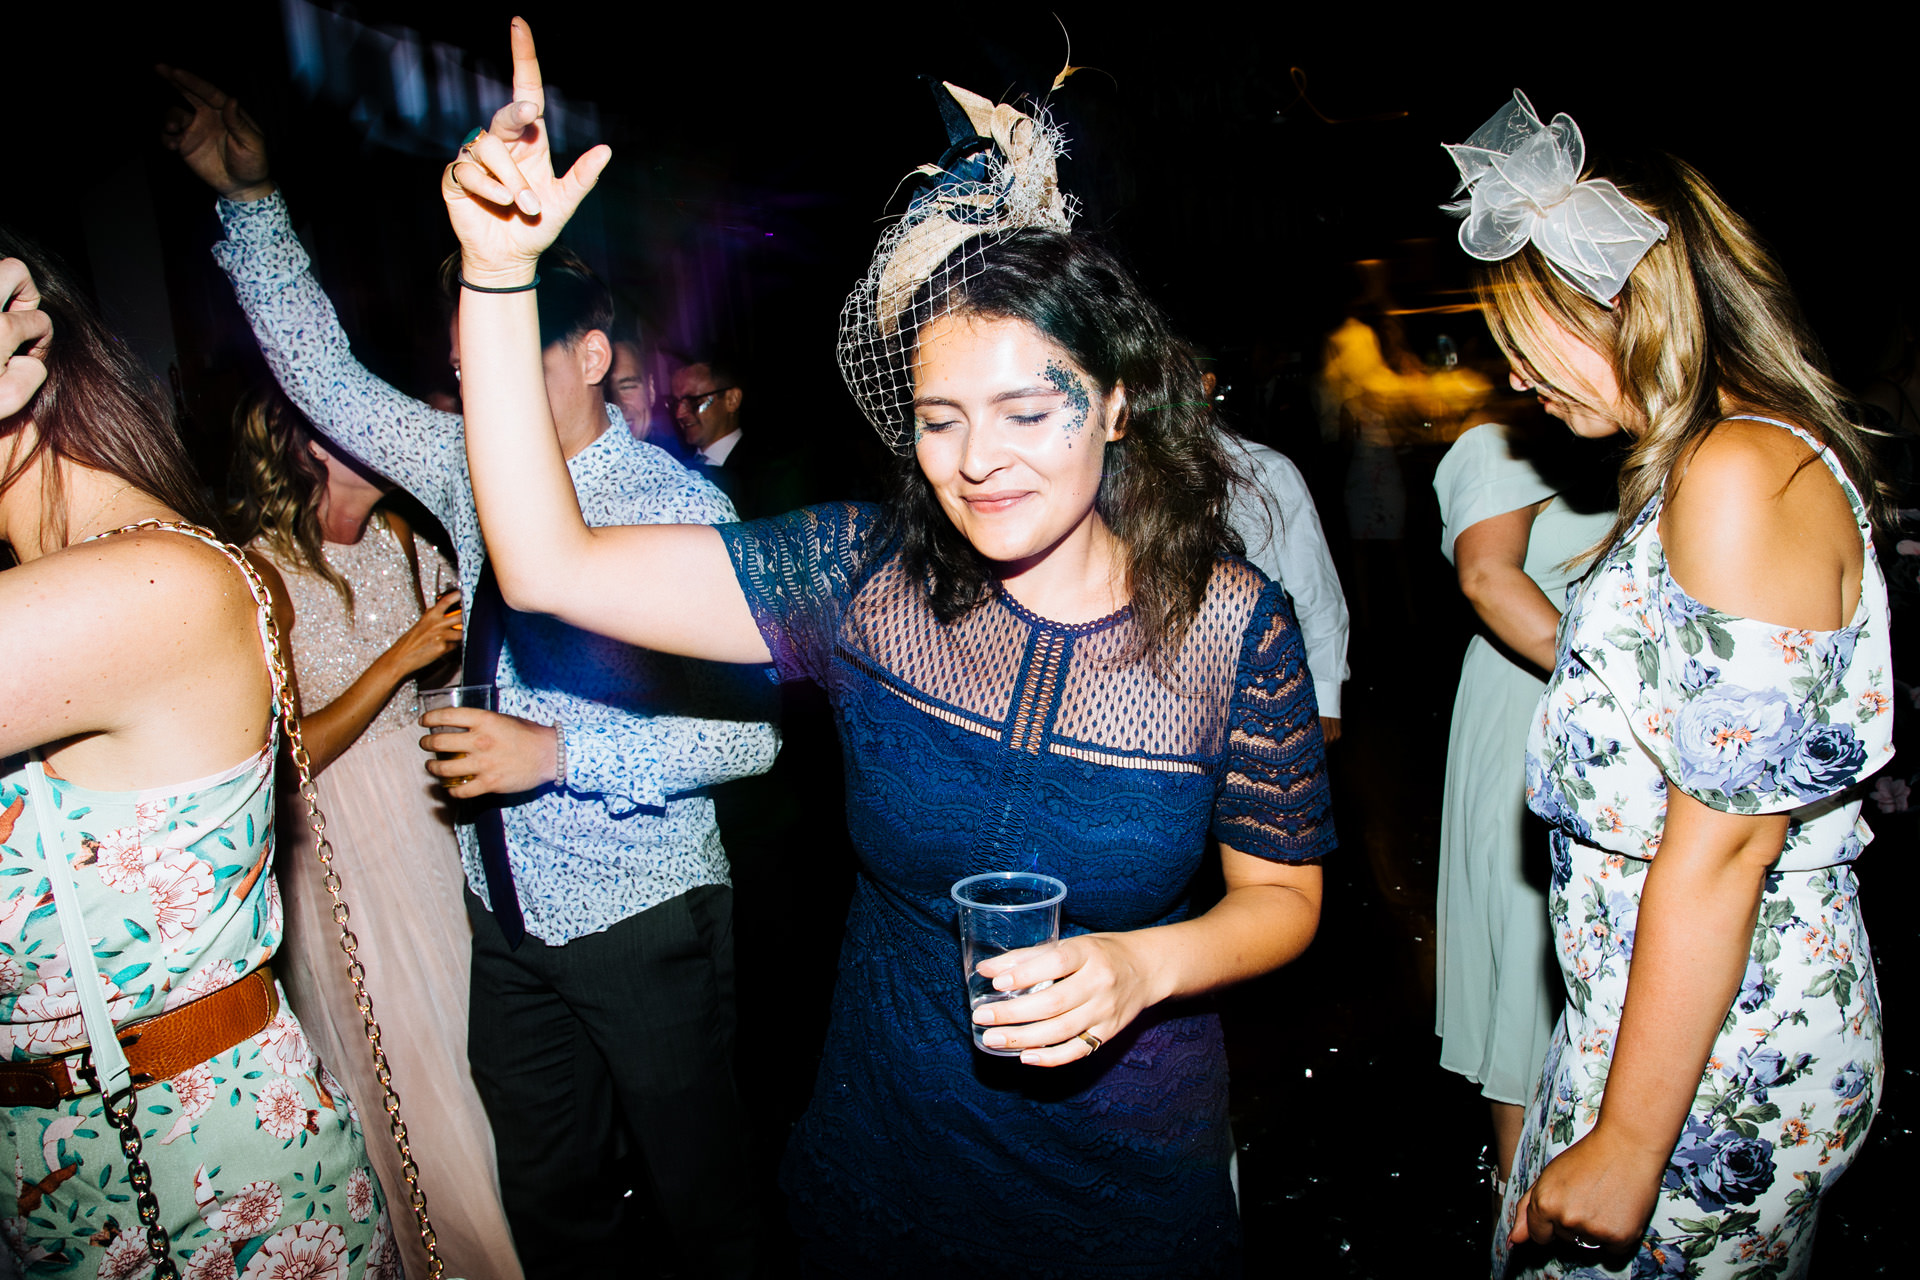 lady in navy blue dress and fascinator wearing glitter on her face partying